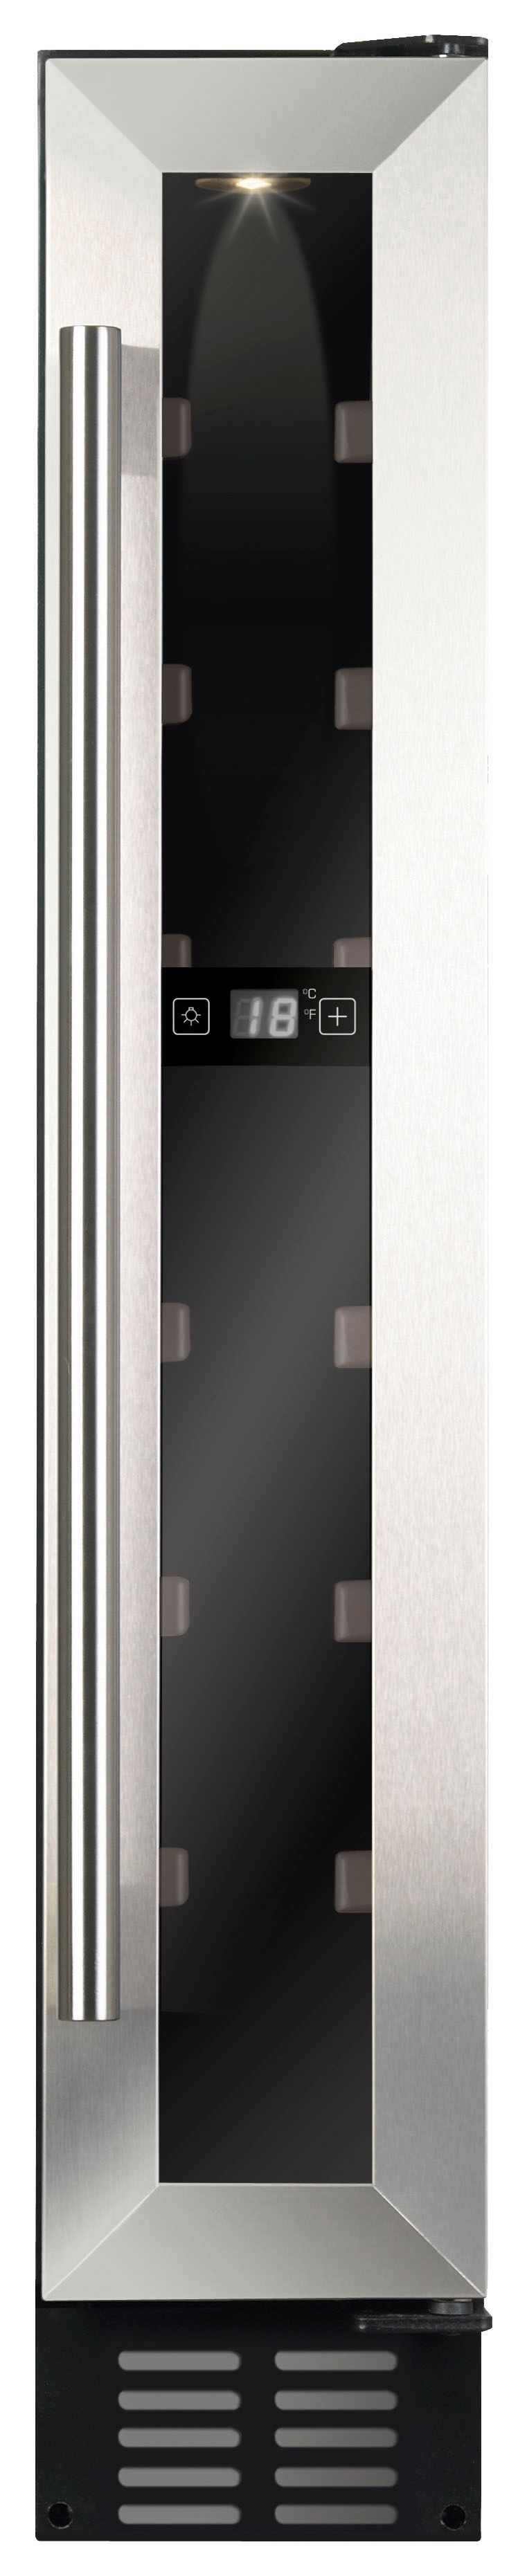 Image of CDA FWC153SS 150mm Slimline Wine Cooler - Stainless Steel